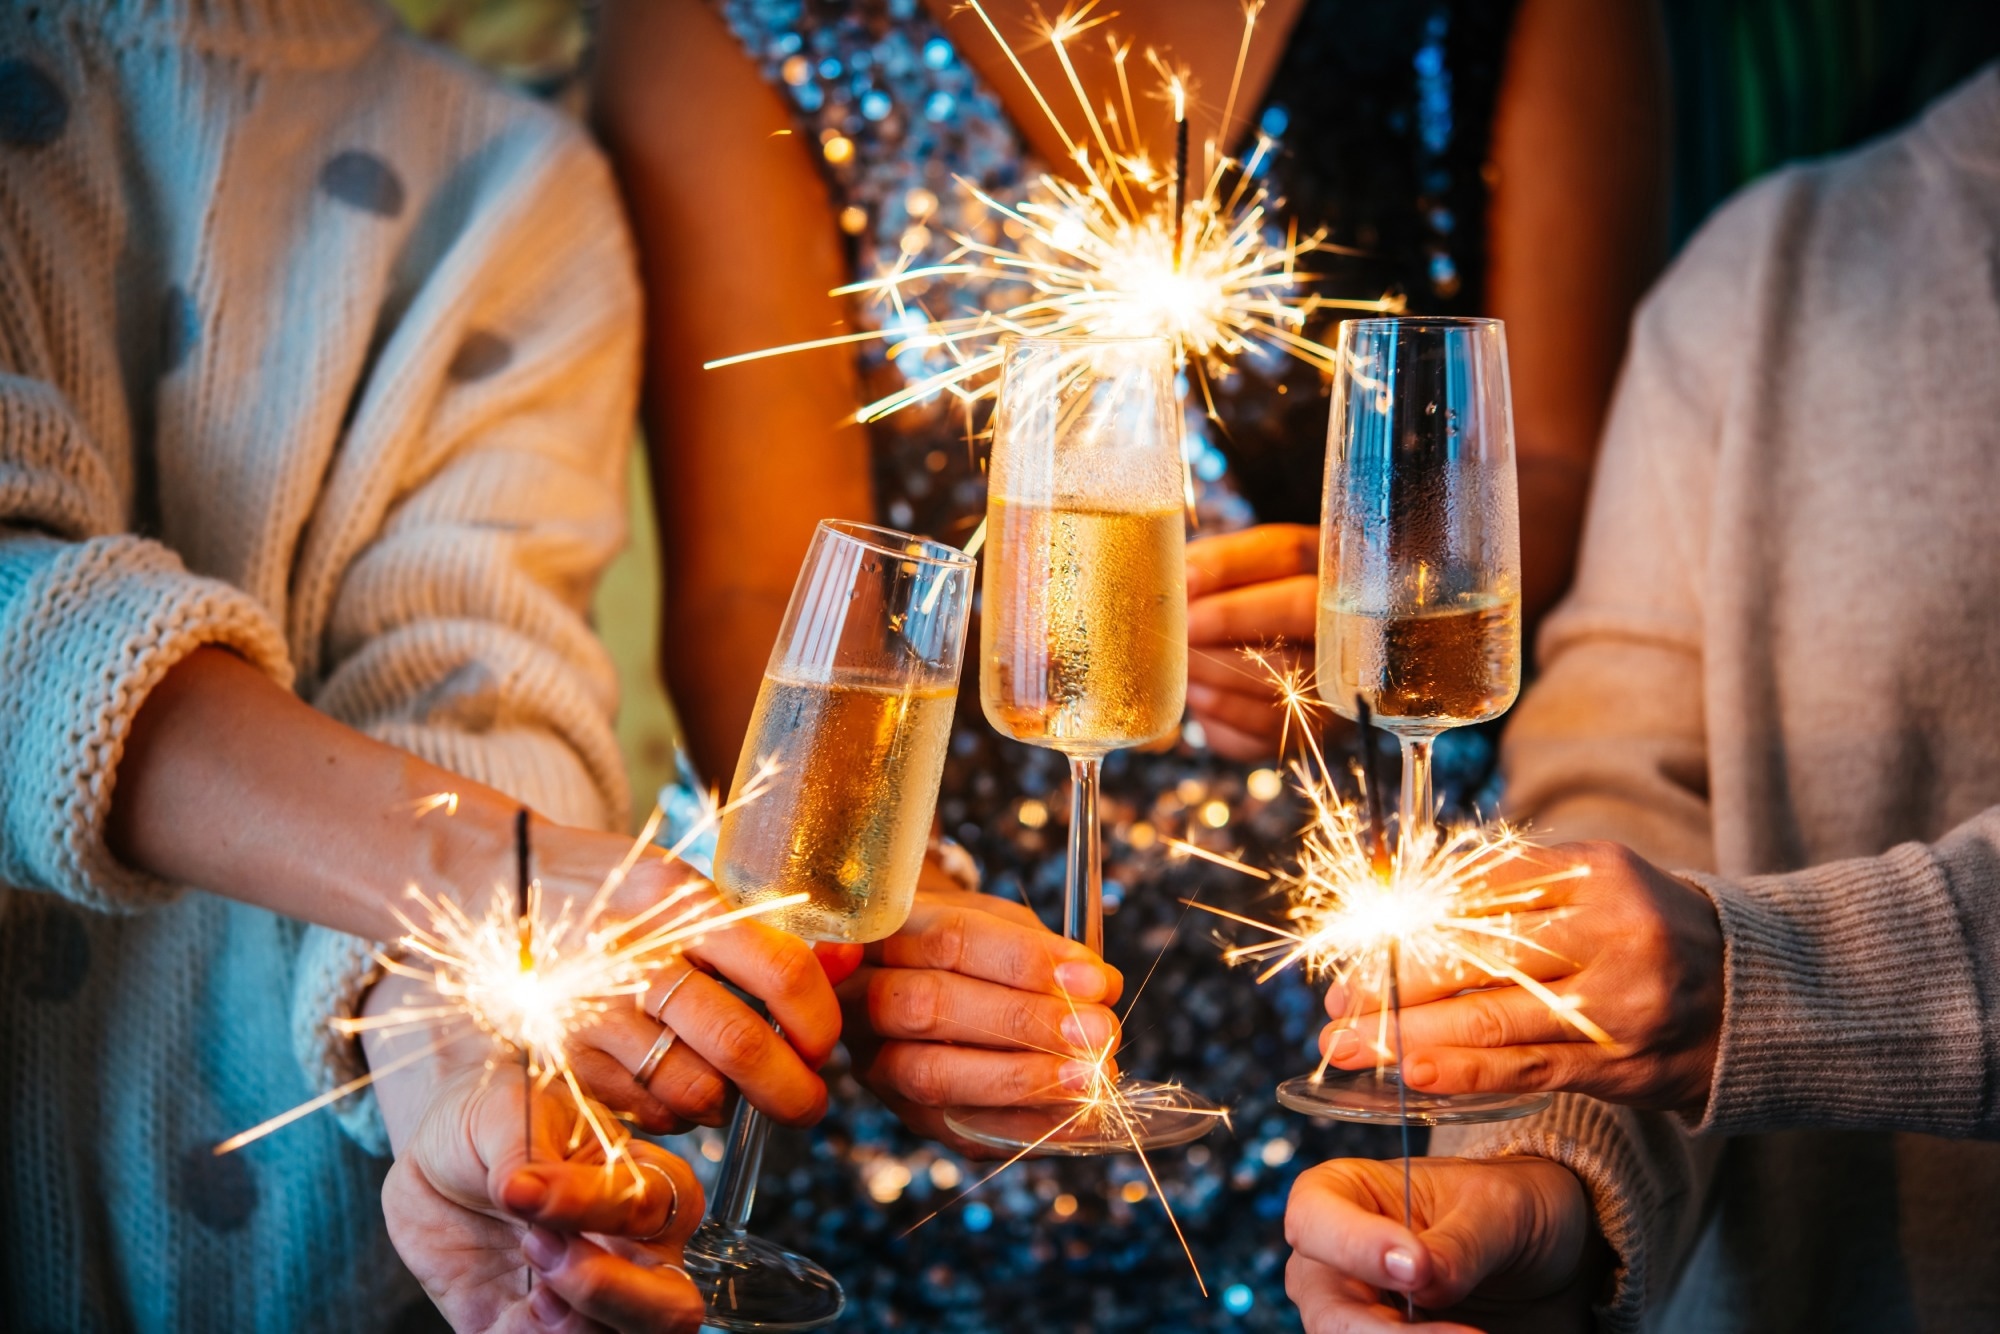 Study: Unravelling the effect of New Year’s Eve celebrations on SARS-CoV-2 transmission. Image Credit: fornStudio / Shutterstock.com